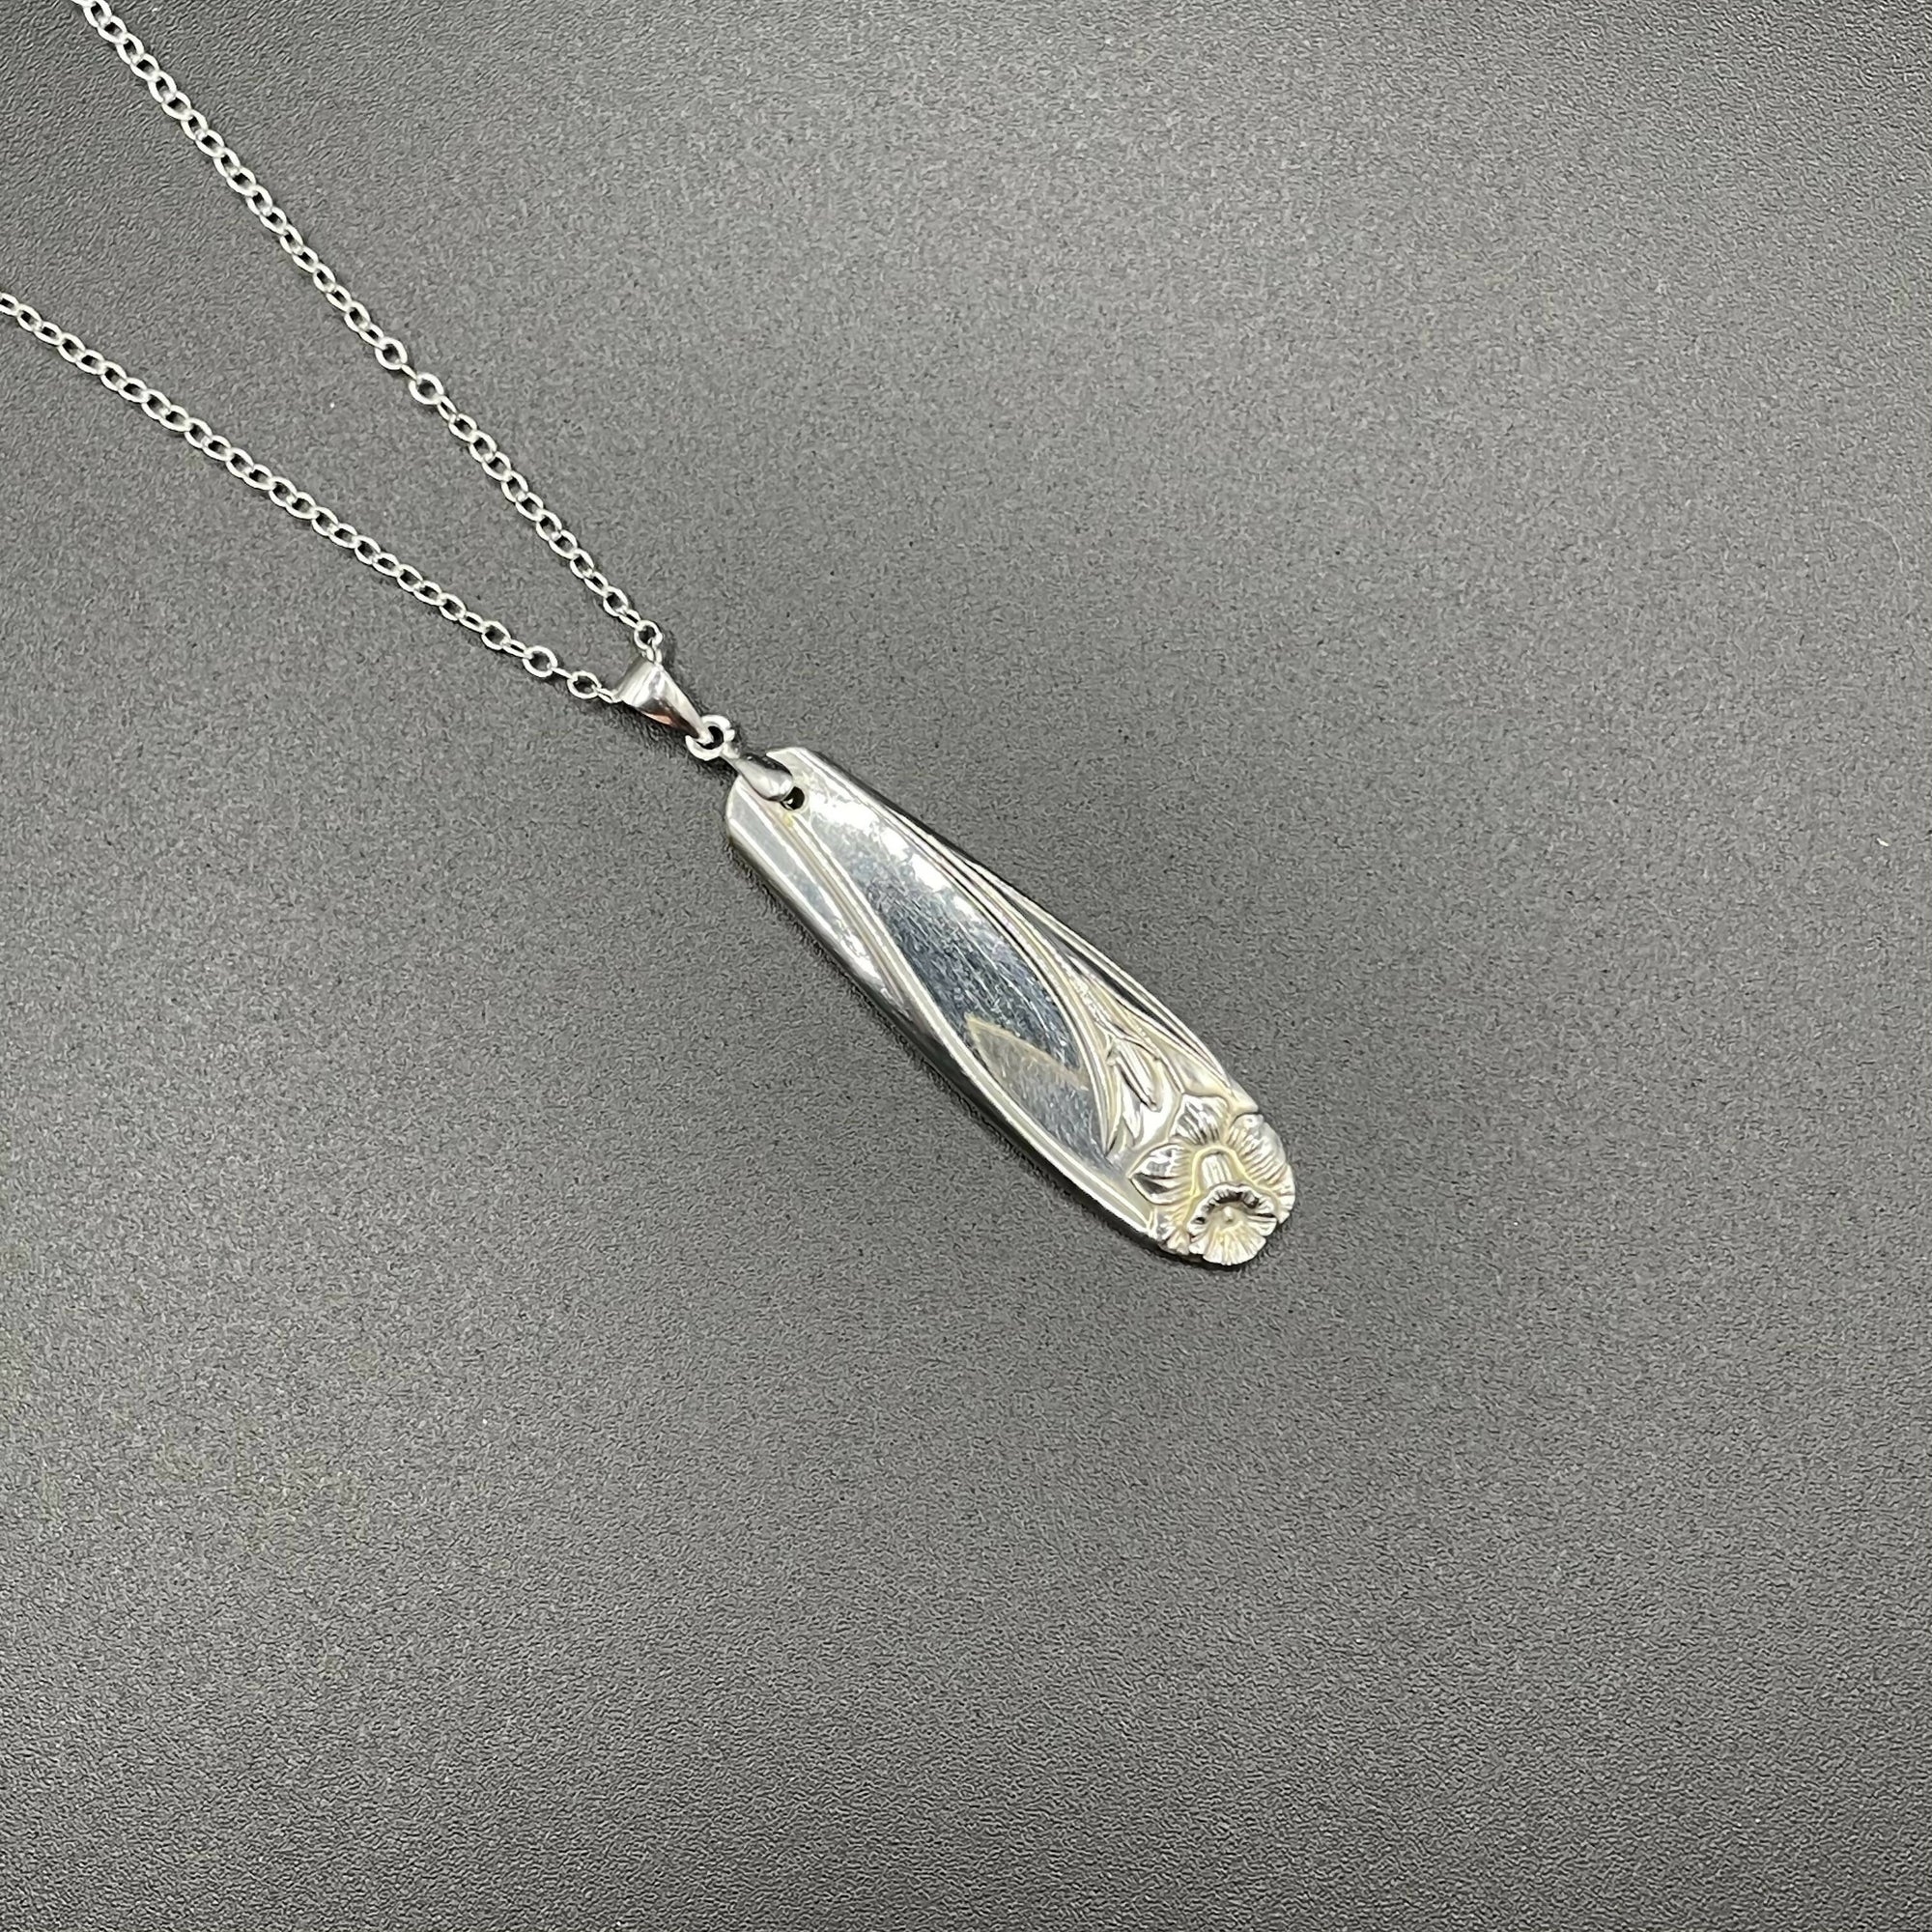 Repurposing By Glenna | Silver Spoon Daffodil Pendant on 20" Sterling Silver chain